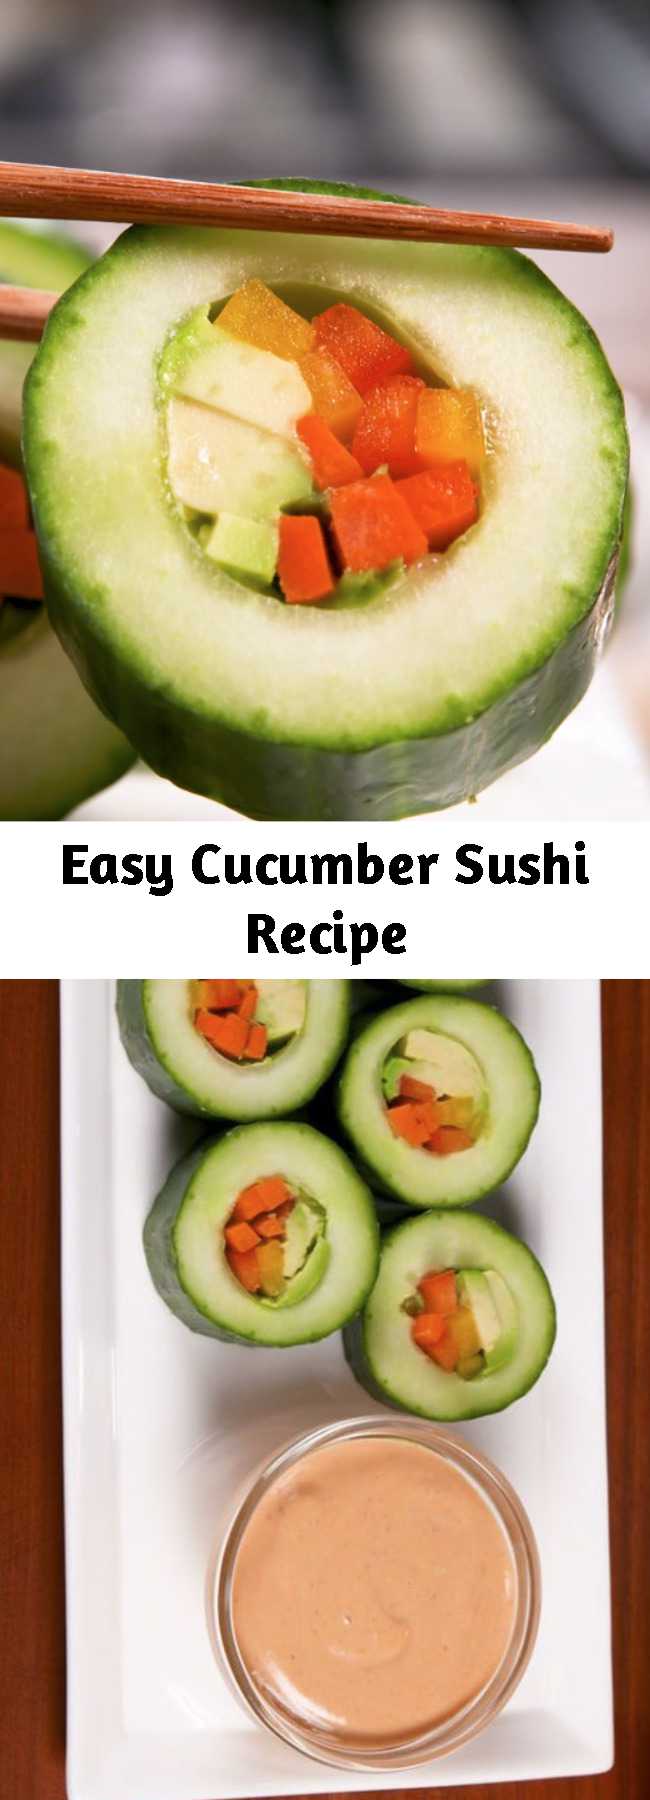 Easy Cucumber Sushi Recipe - We know it's not real sushi but we love it just the same. #food #easyrecipe #vegetarian #keto #healthyeating